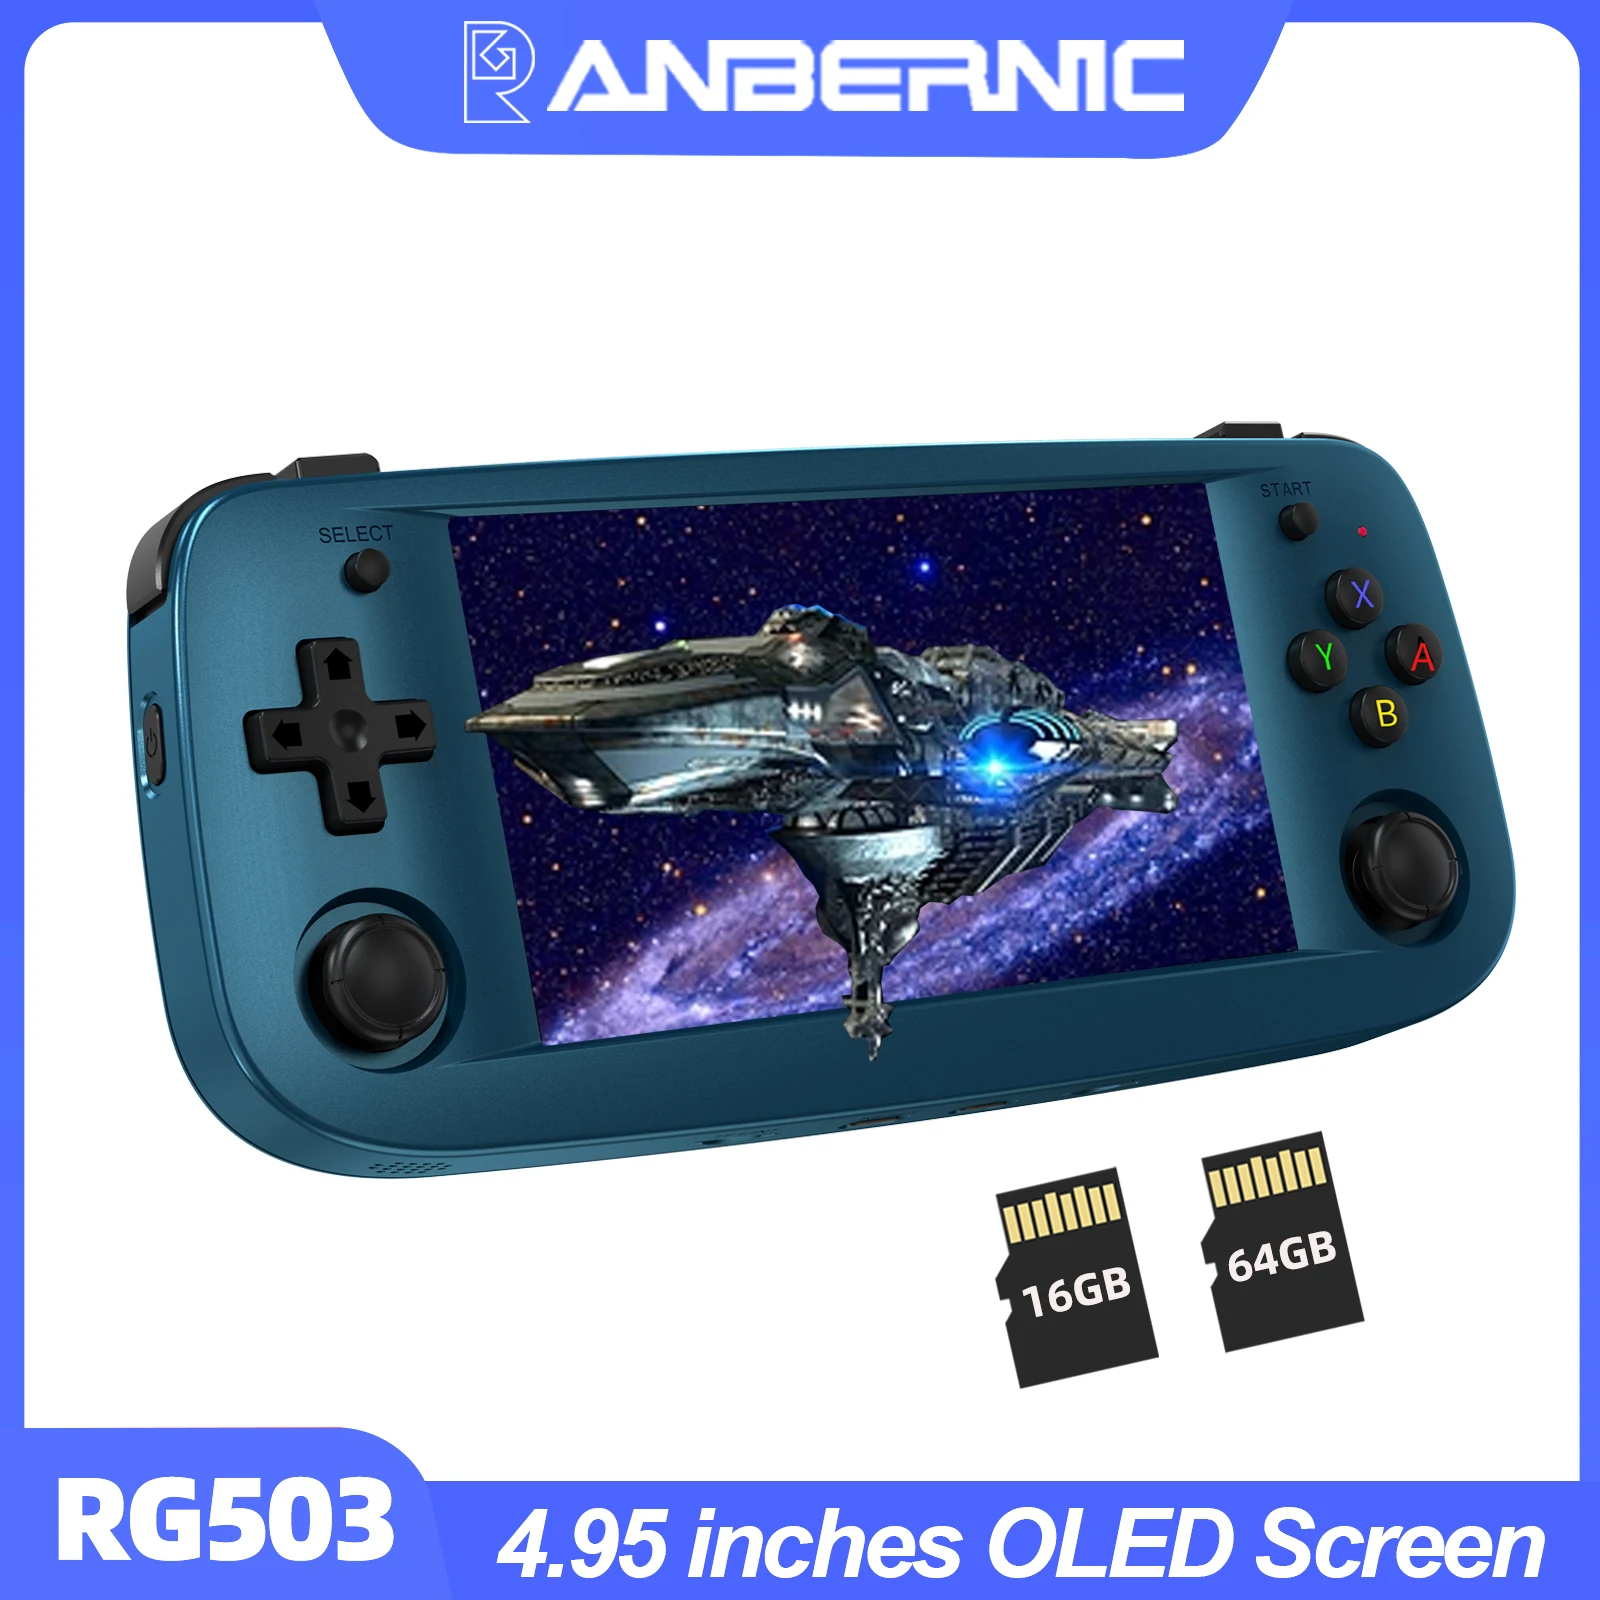 ANBERNIC RG503 RG351P Retro Video Game Console RK3326 Linux System PC Shell PS1 Game Player Portable Pocket HandheldGame Console